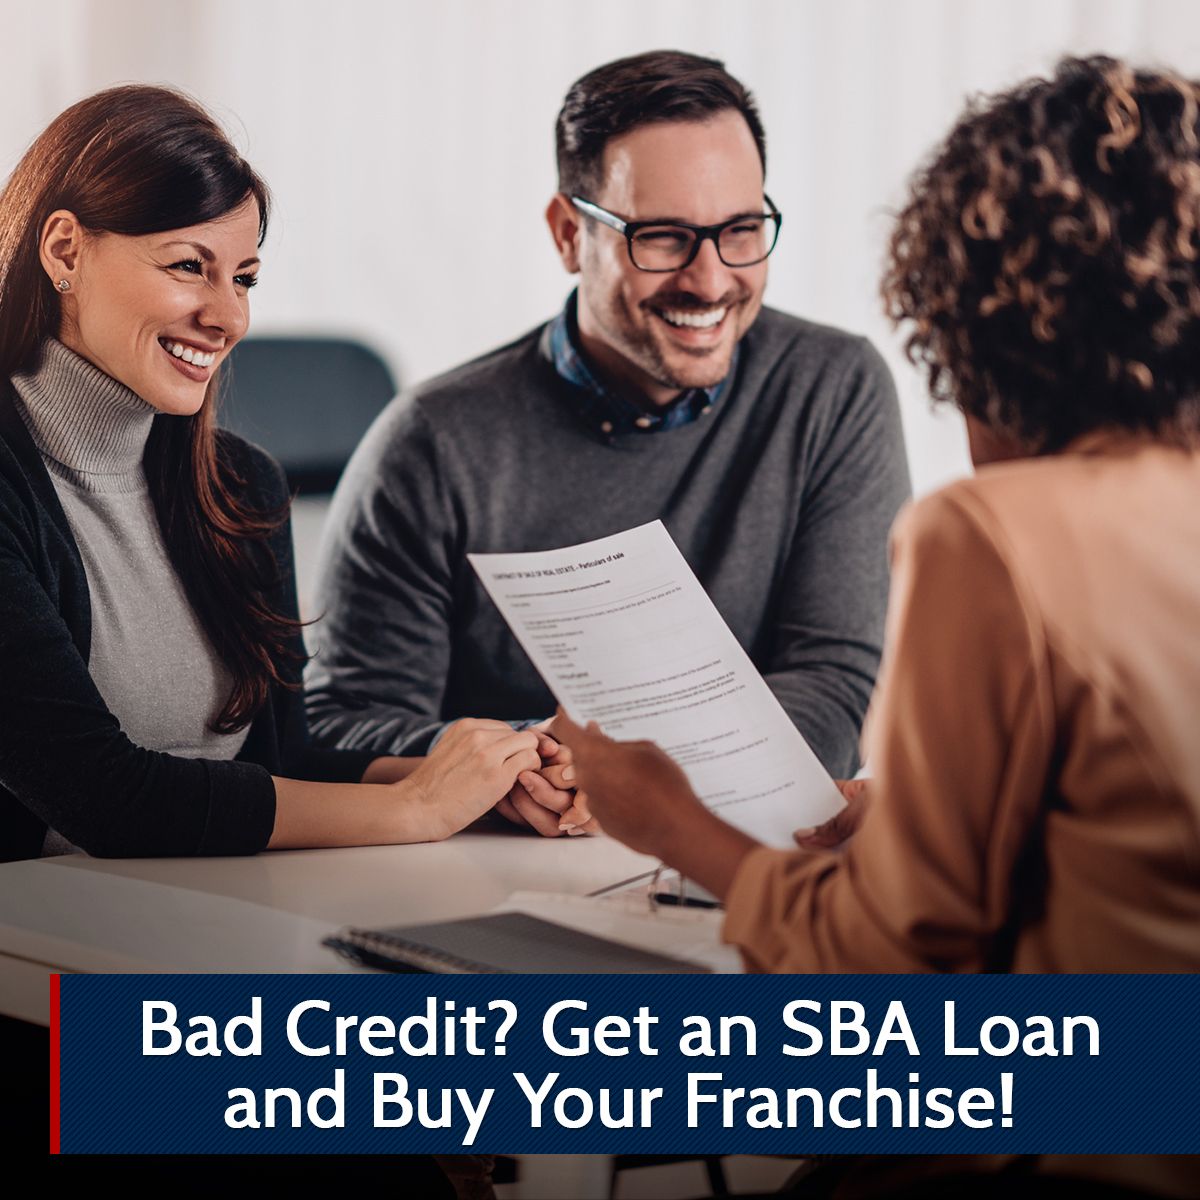 Bad Credit? Get an SBA Loan and Buy Your Franchise!